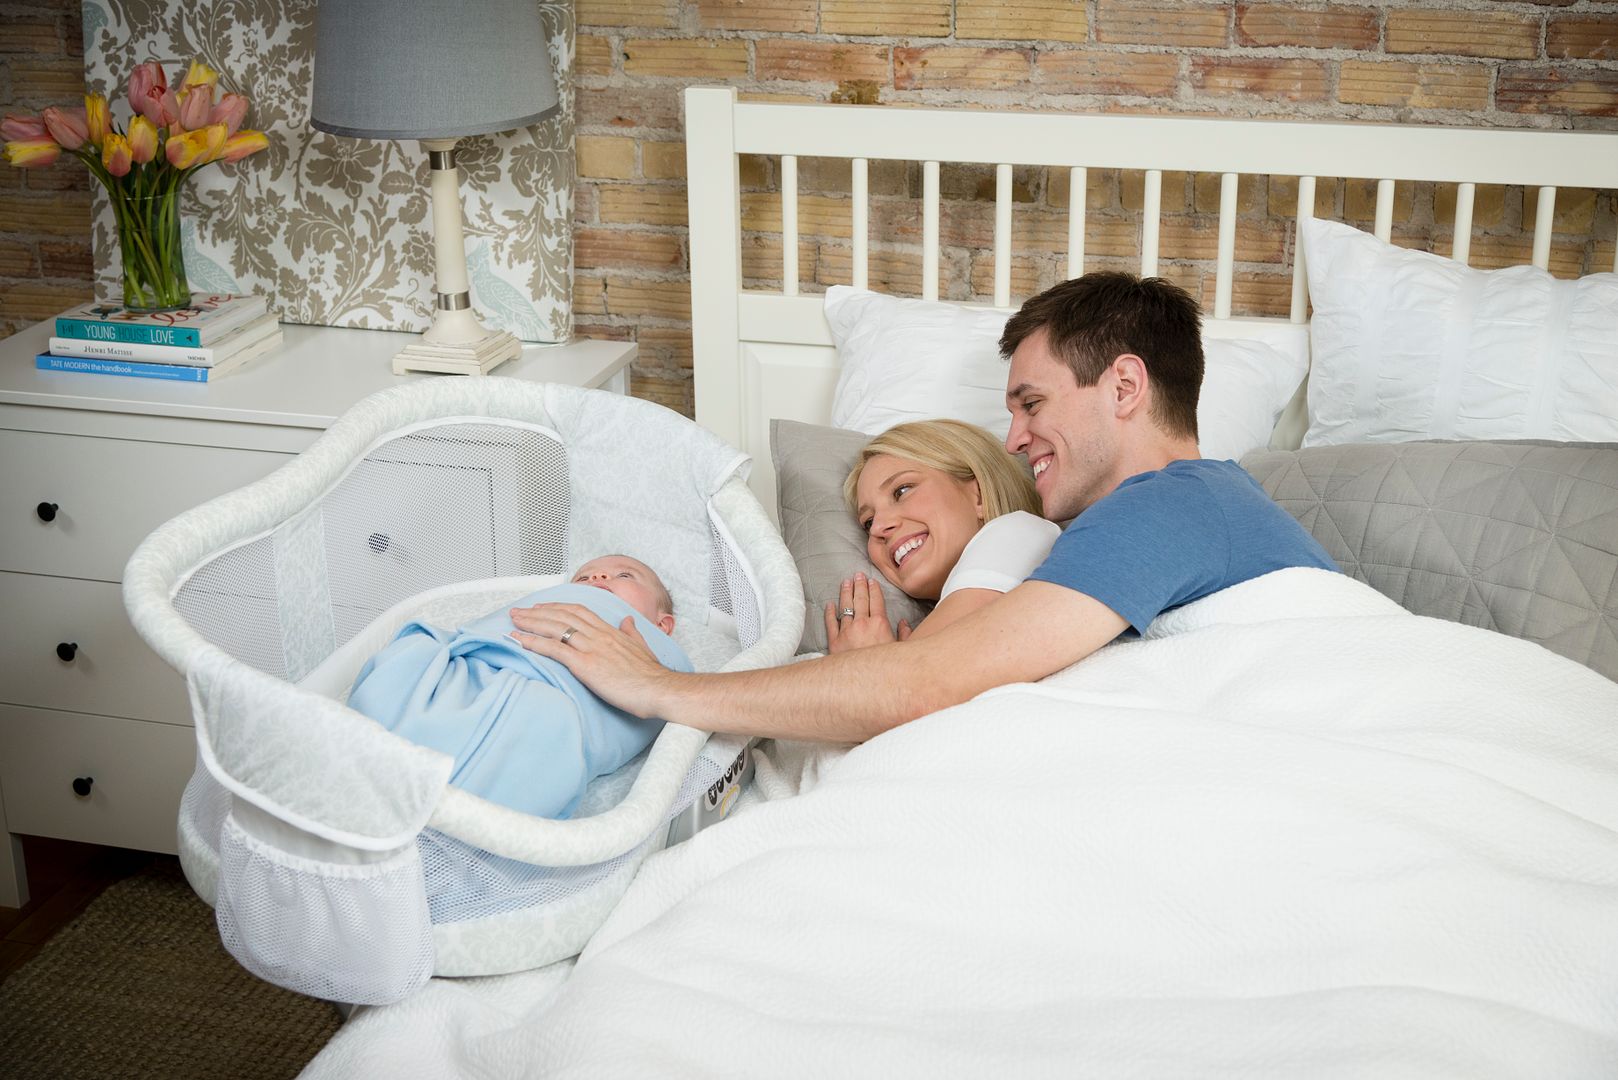 Coolest baby gifts of 2014:  HALO Bassinest Swivel Sleeper